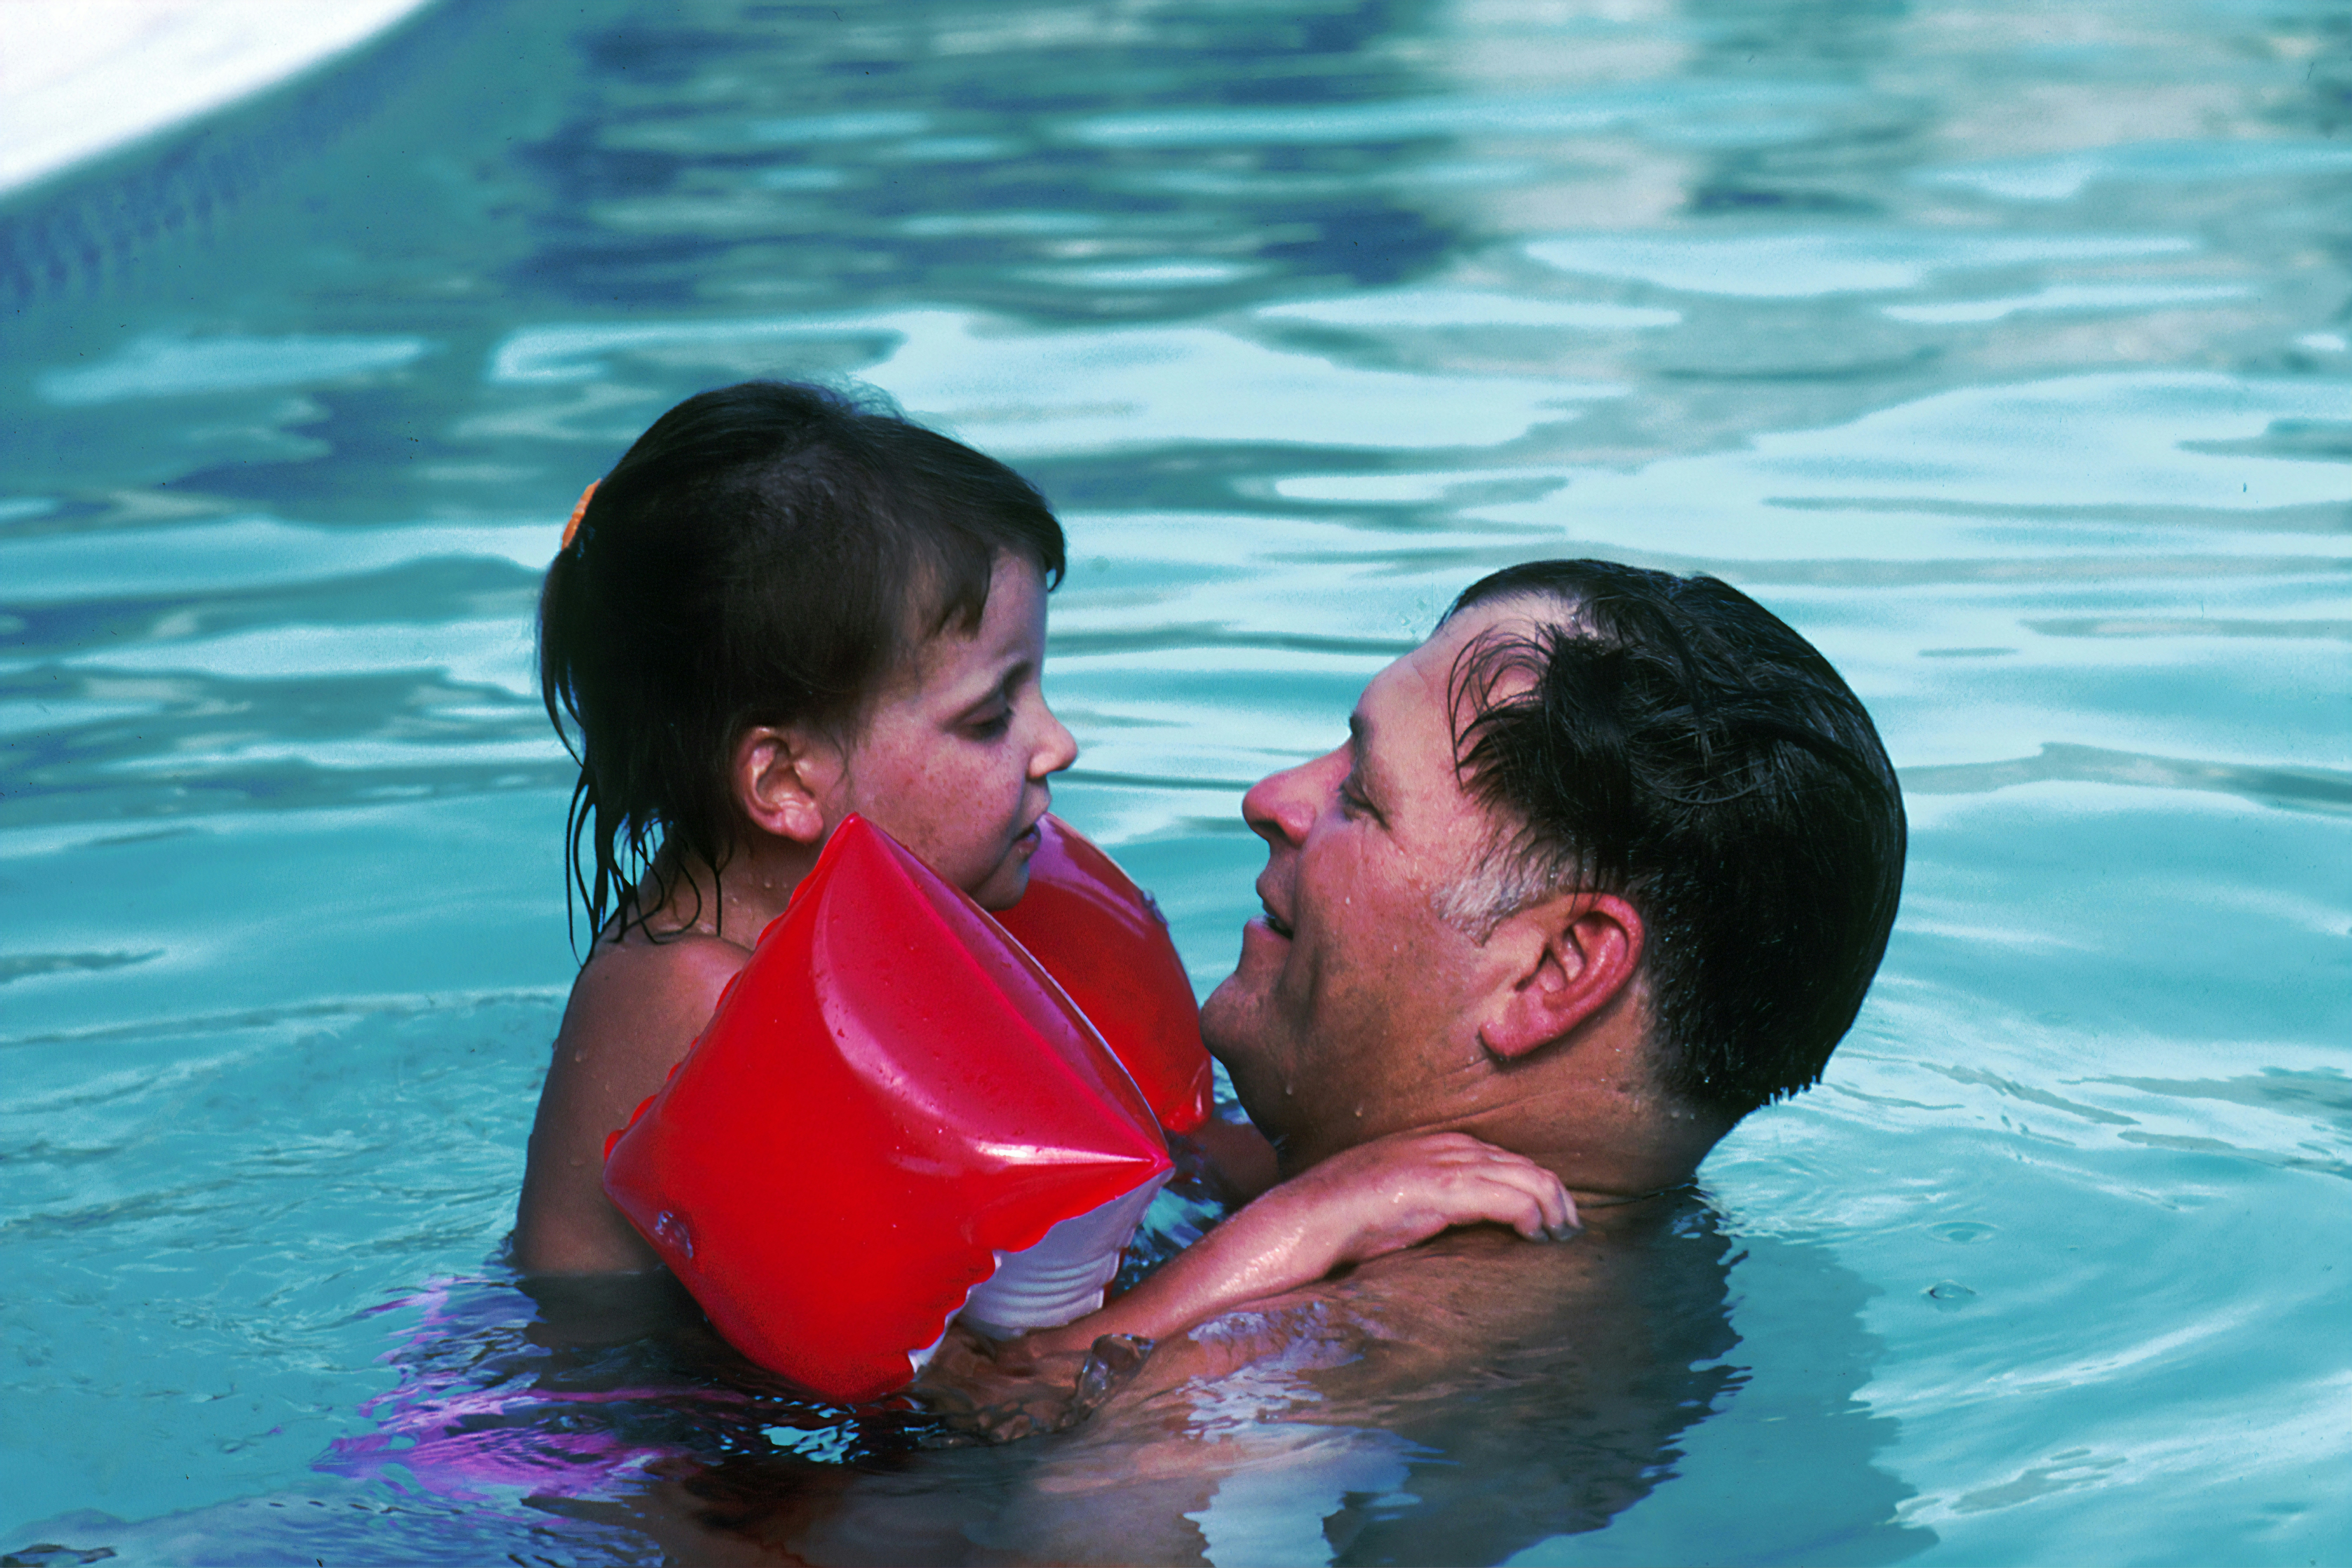 Father and Daughter in a Pool. A 10 year-old Caucasian girl with her father in a swimming pool. She was diagnosed at age three with a form of Acute Lymphoblastic Leukemia (ALL) that did not respond to therapy. She is presently in long-term remission after an experimental bone marrow transplant was performed. She now suffers from chronic GVH (Graft Versus Host Disease) which is rare.